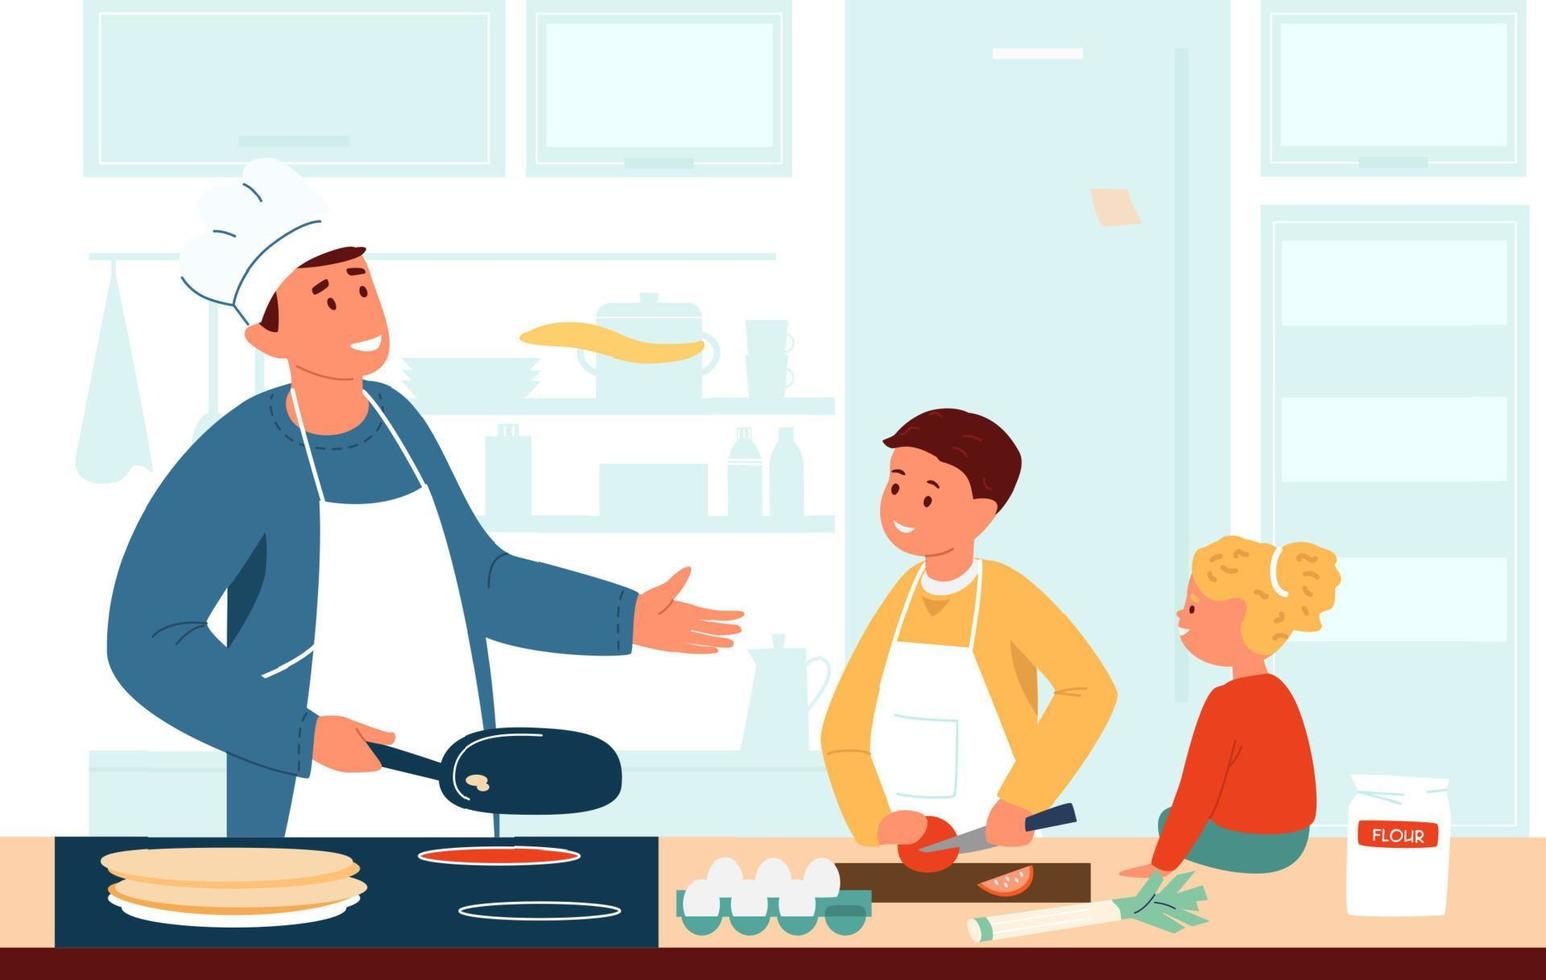 Vector Illustration Of Children In Aprons Making Cake Together In The Kitchen. Older Brother Helps His Little Sister Decorate Cake. Flat Design.